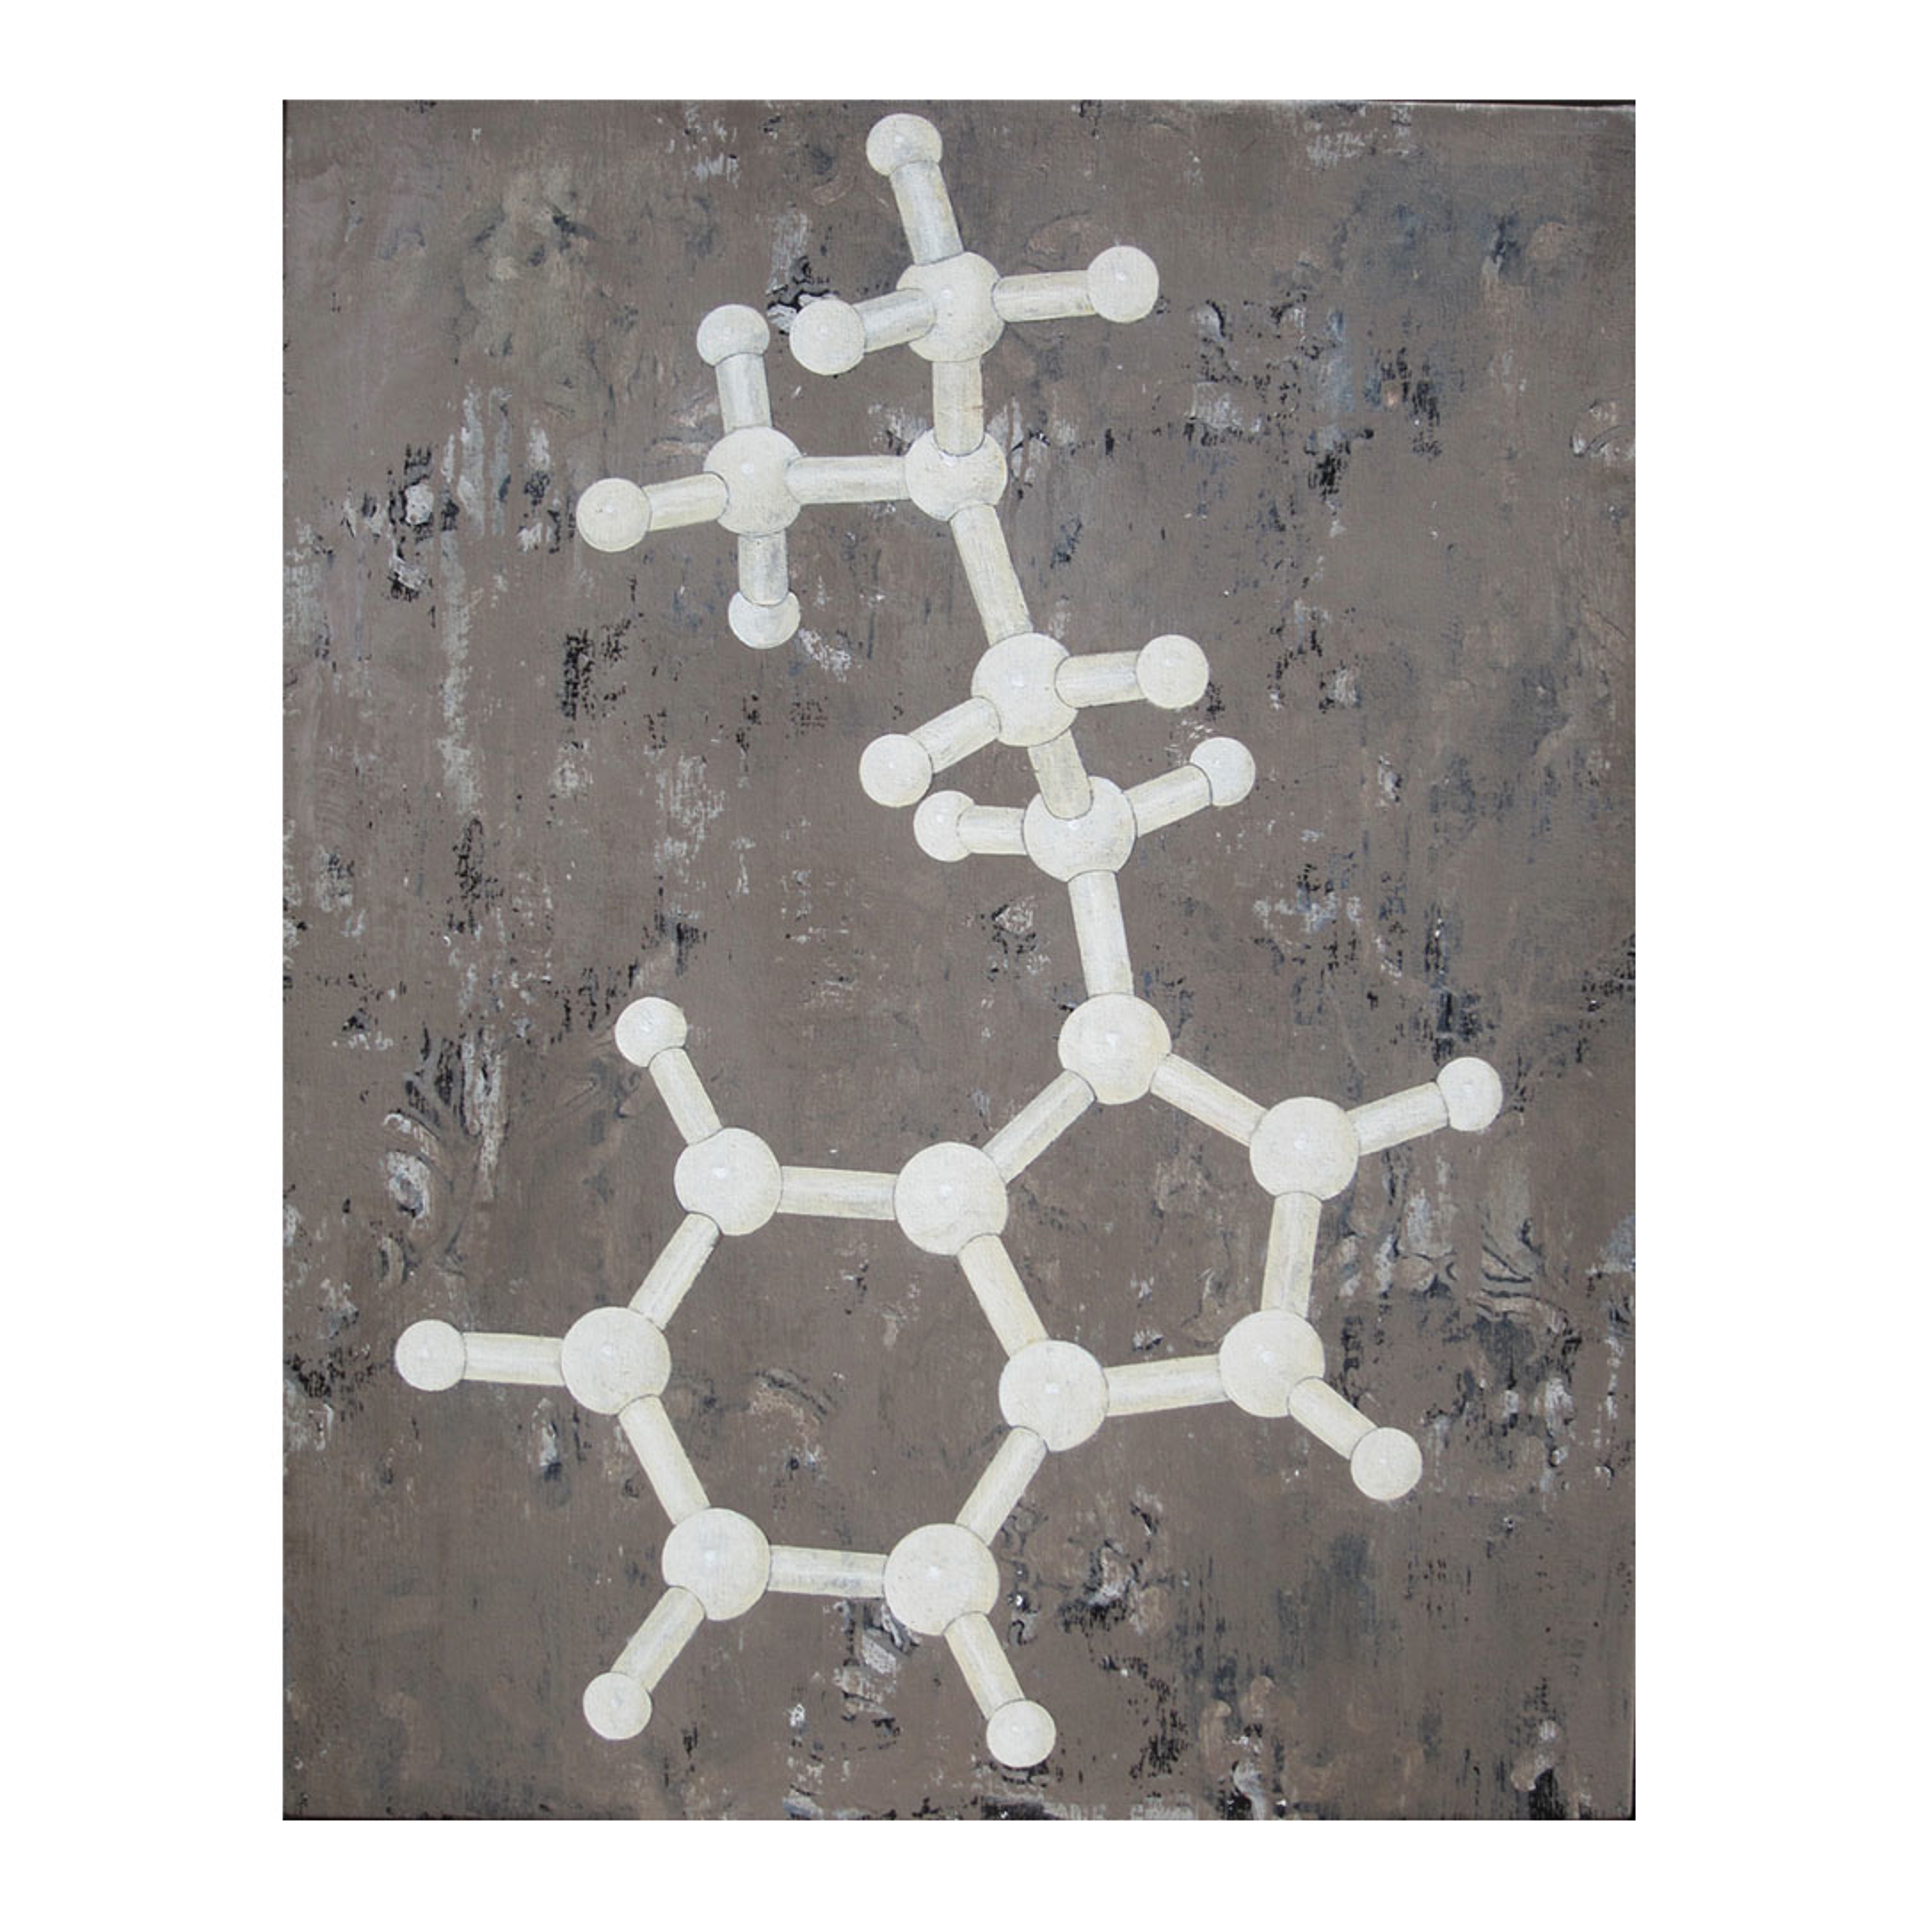 Tryptamine Molecular Structure by Dominique Rousserie by St Barth Artwork